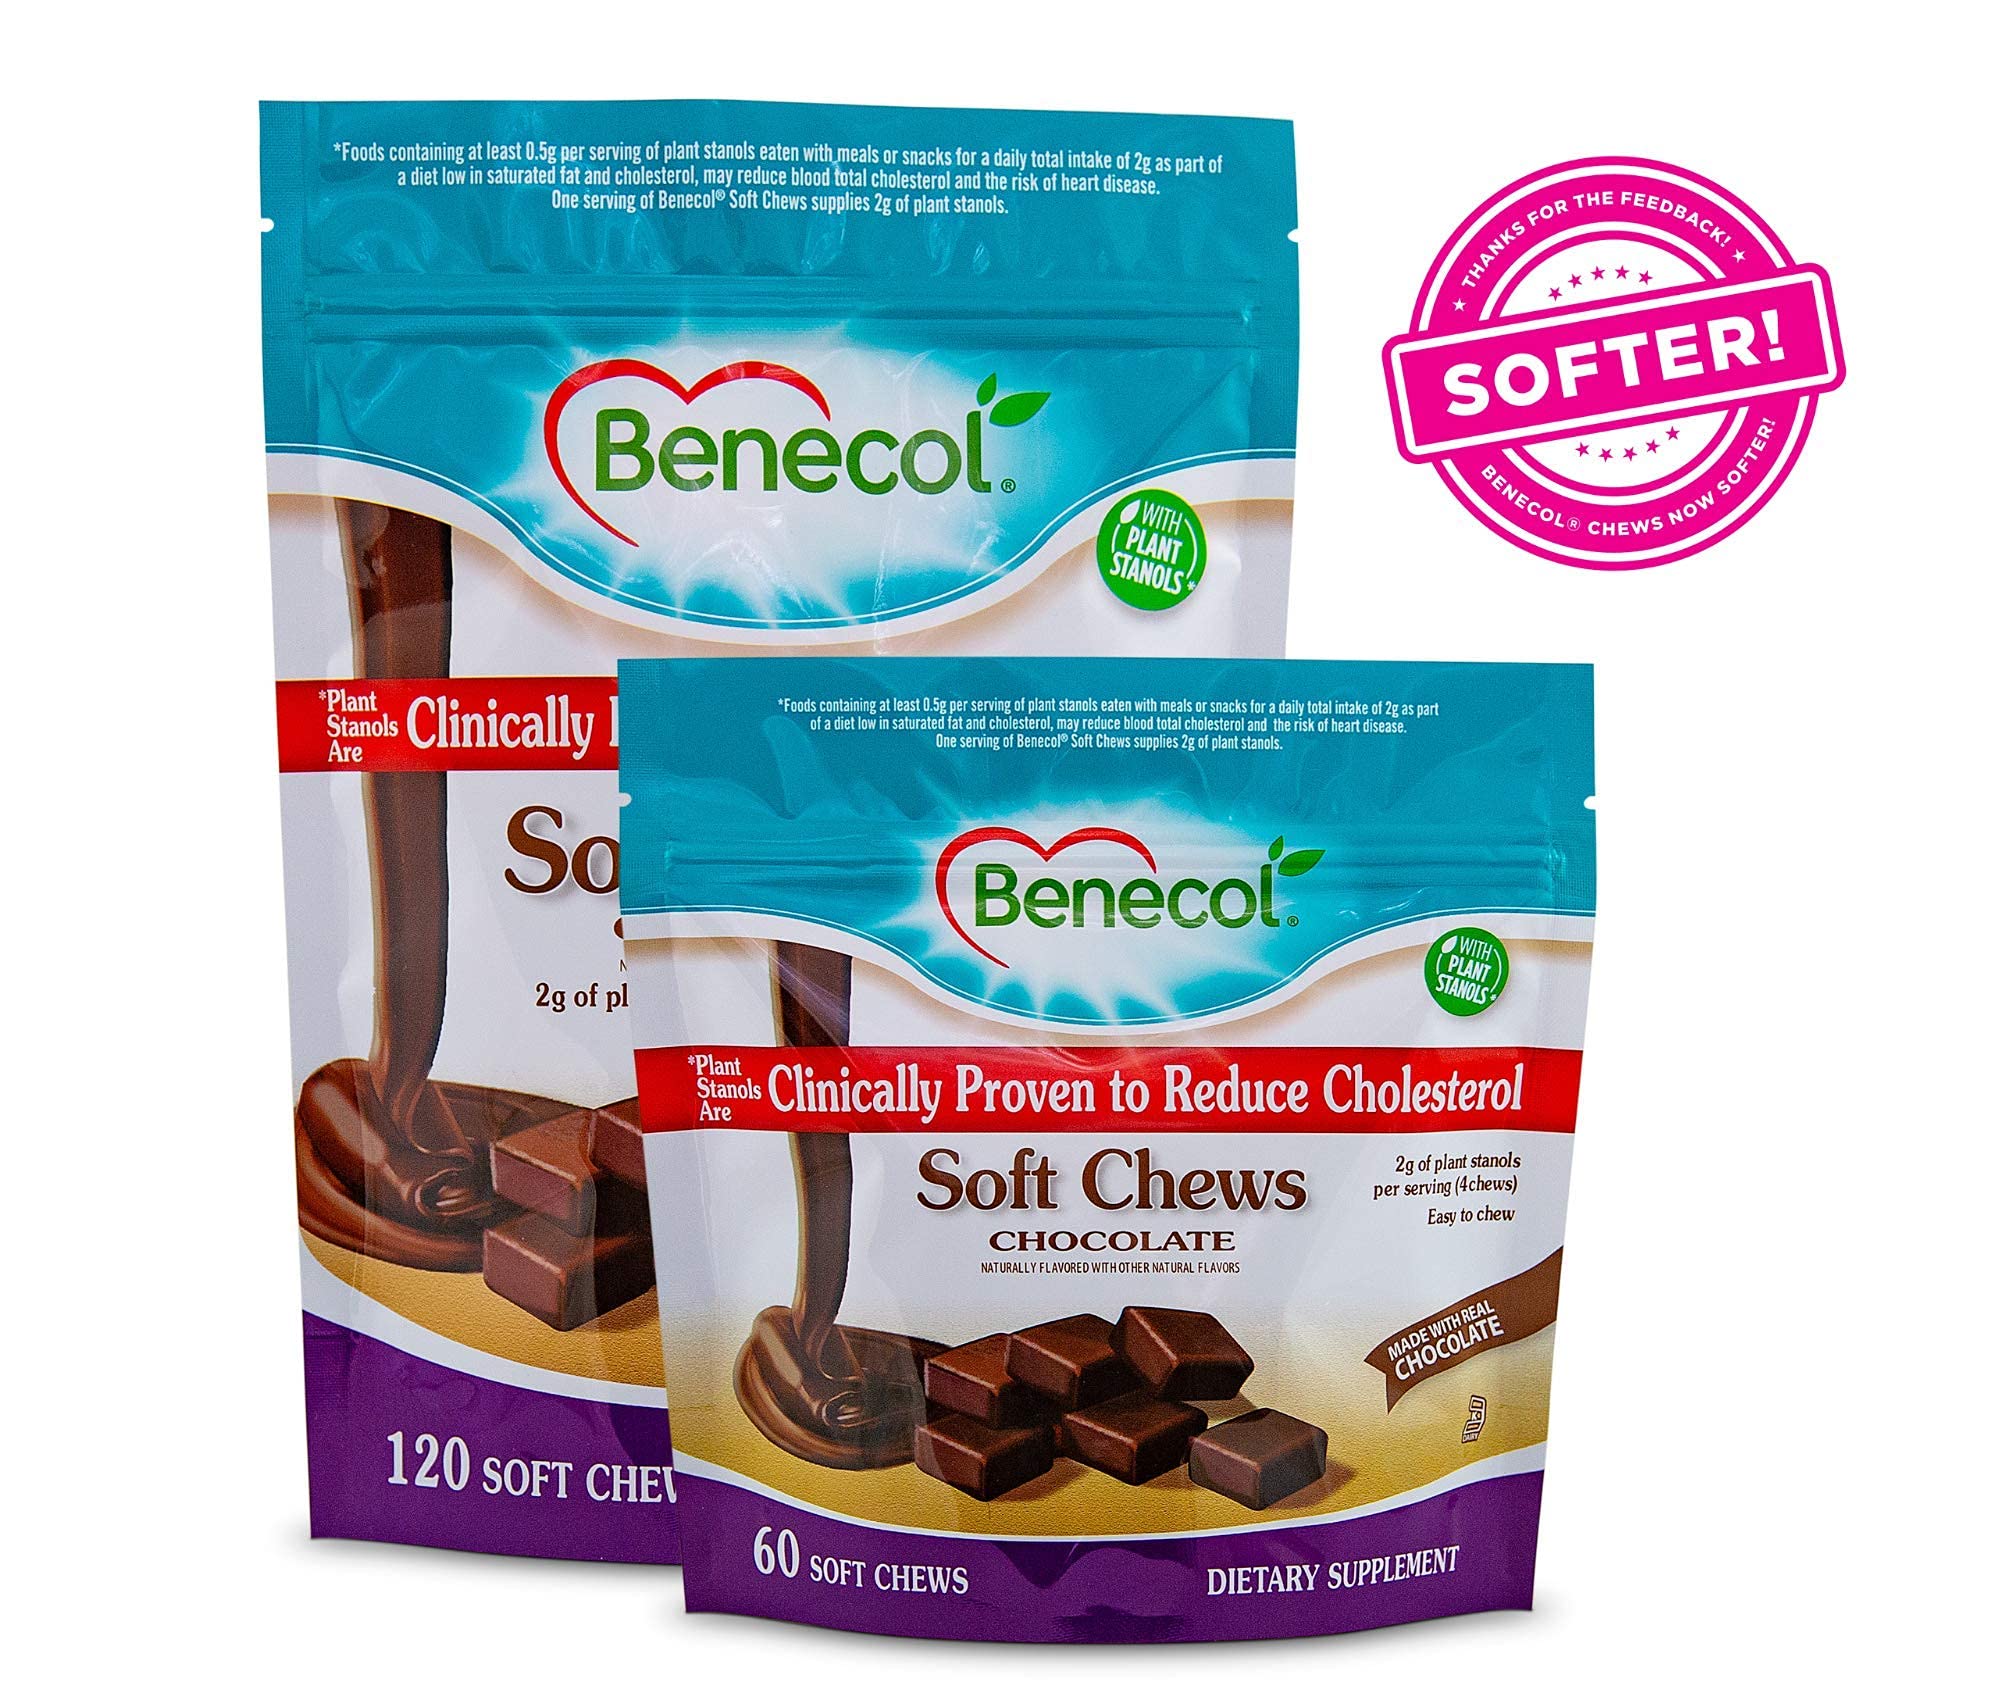 Benecol® Soft Chews - Made with Cholesterol-Lowering Plant Stanols, which are Clinically Proven to Reduce Total & LDL Cholesterol* - Dietary Supplement (120 Chocolate Chews)